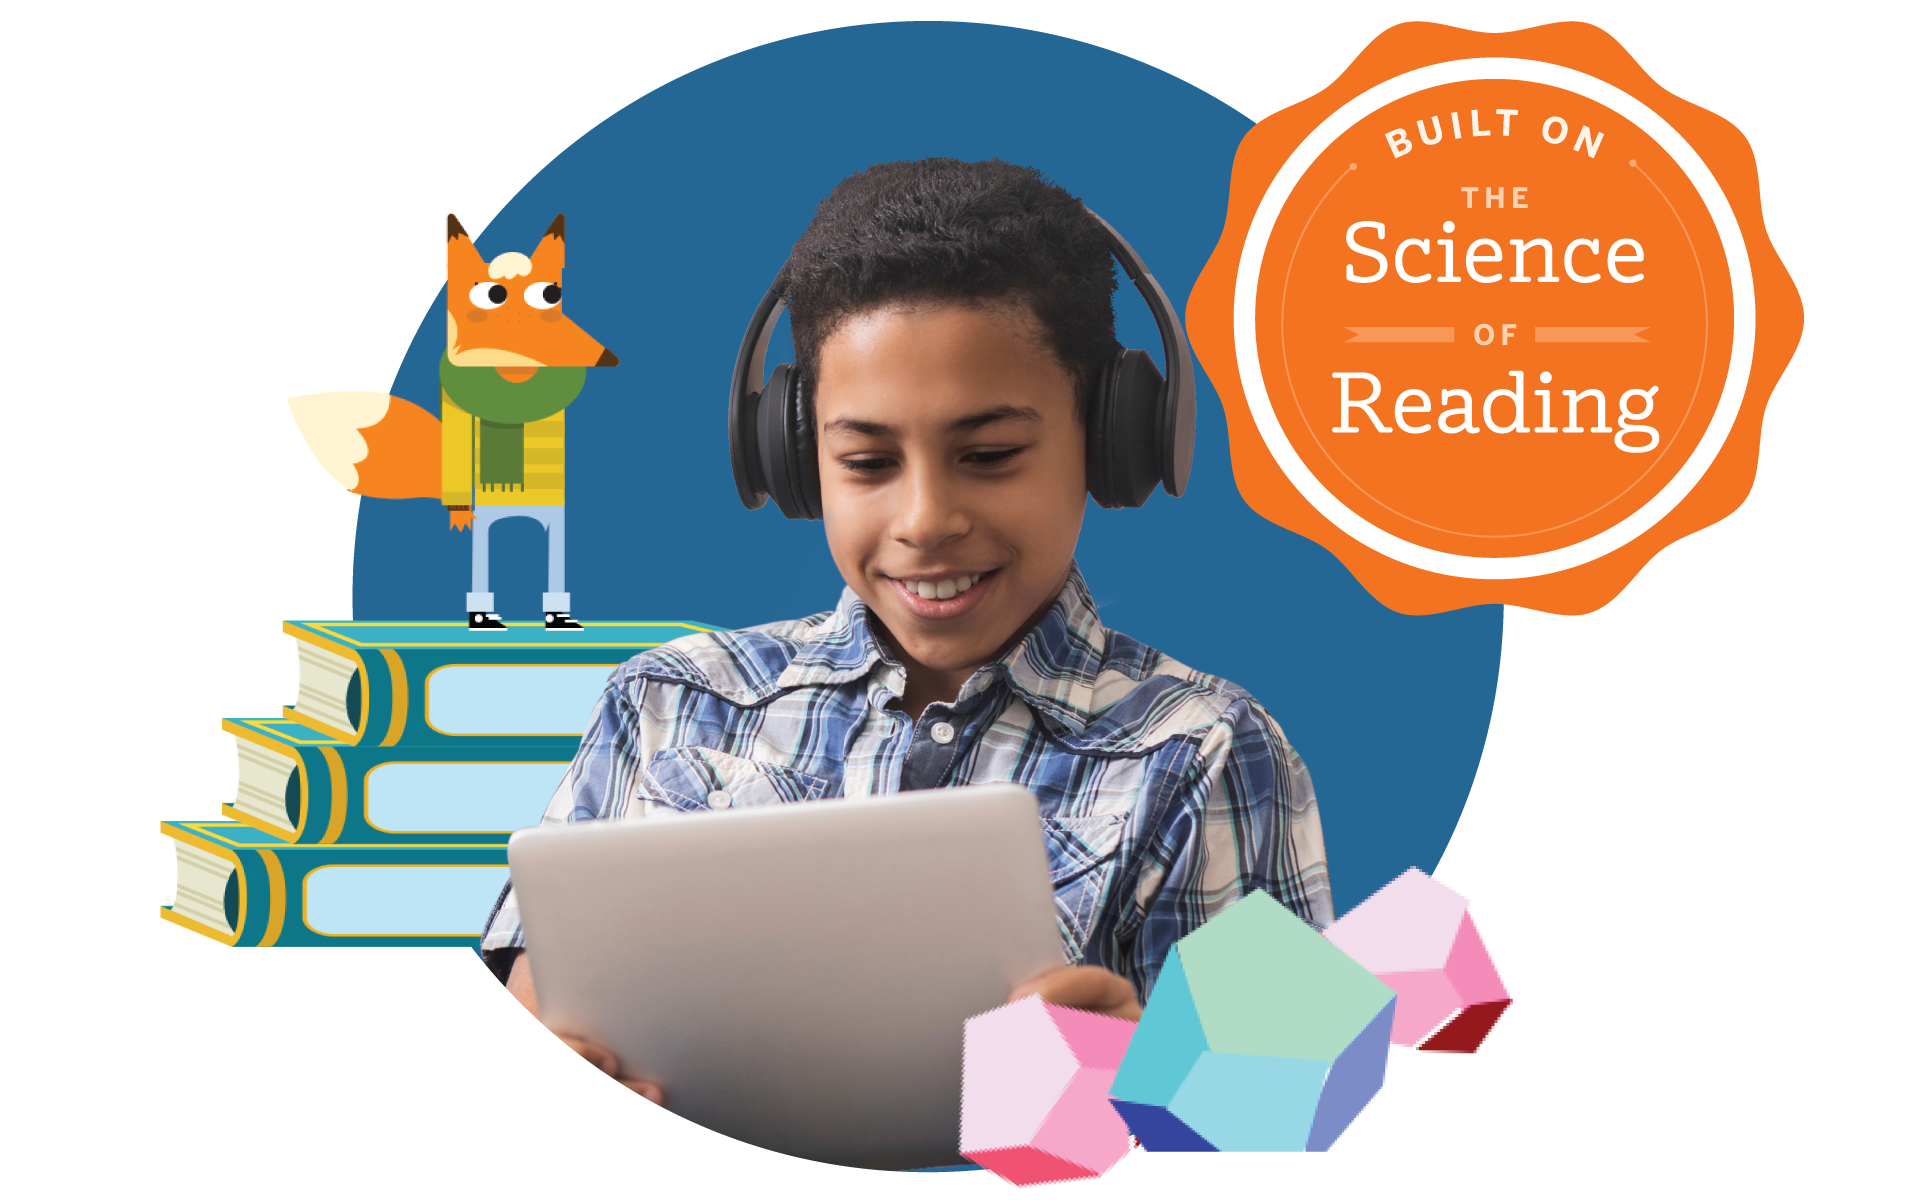 Getting started with Amplify Reading